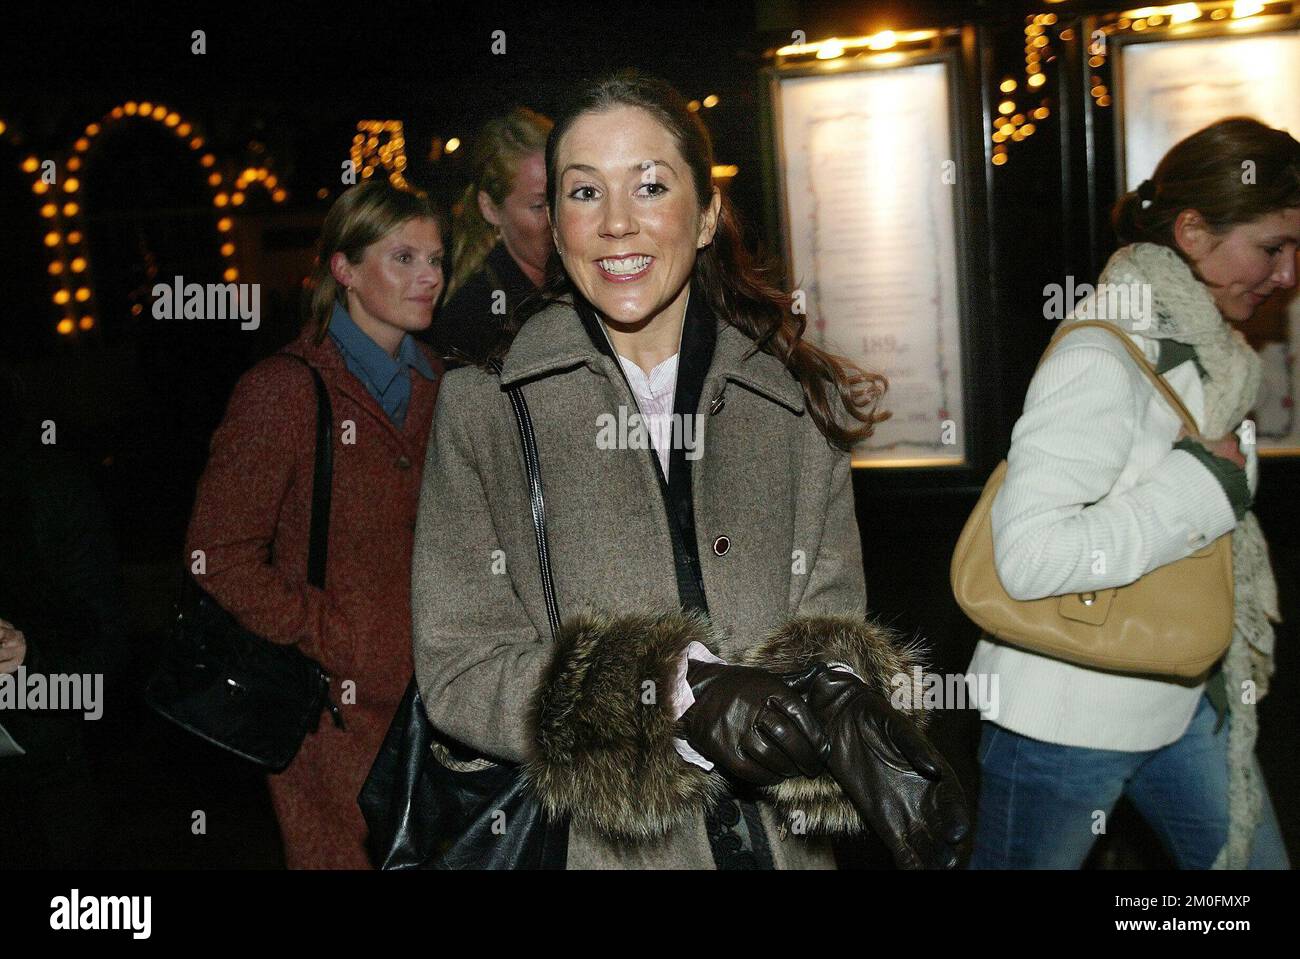 PA PHOTOS/POLFOTO - UK USE ONLY : Mary Donaldson, girlfriend of Crown Prince Frederik in Tivoli. Mary was there with two of her girlfriends, watching the christmas cabaret from the 20th London Toast Theatre, 'Bent the Gladiator'. It is the 10th christmas that the crazy Englishmen entertains the Danes. When asked about the play Mary replied 'fantastic' and that was about all she said to the press. Stock Photo